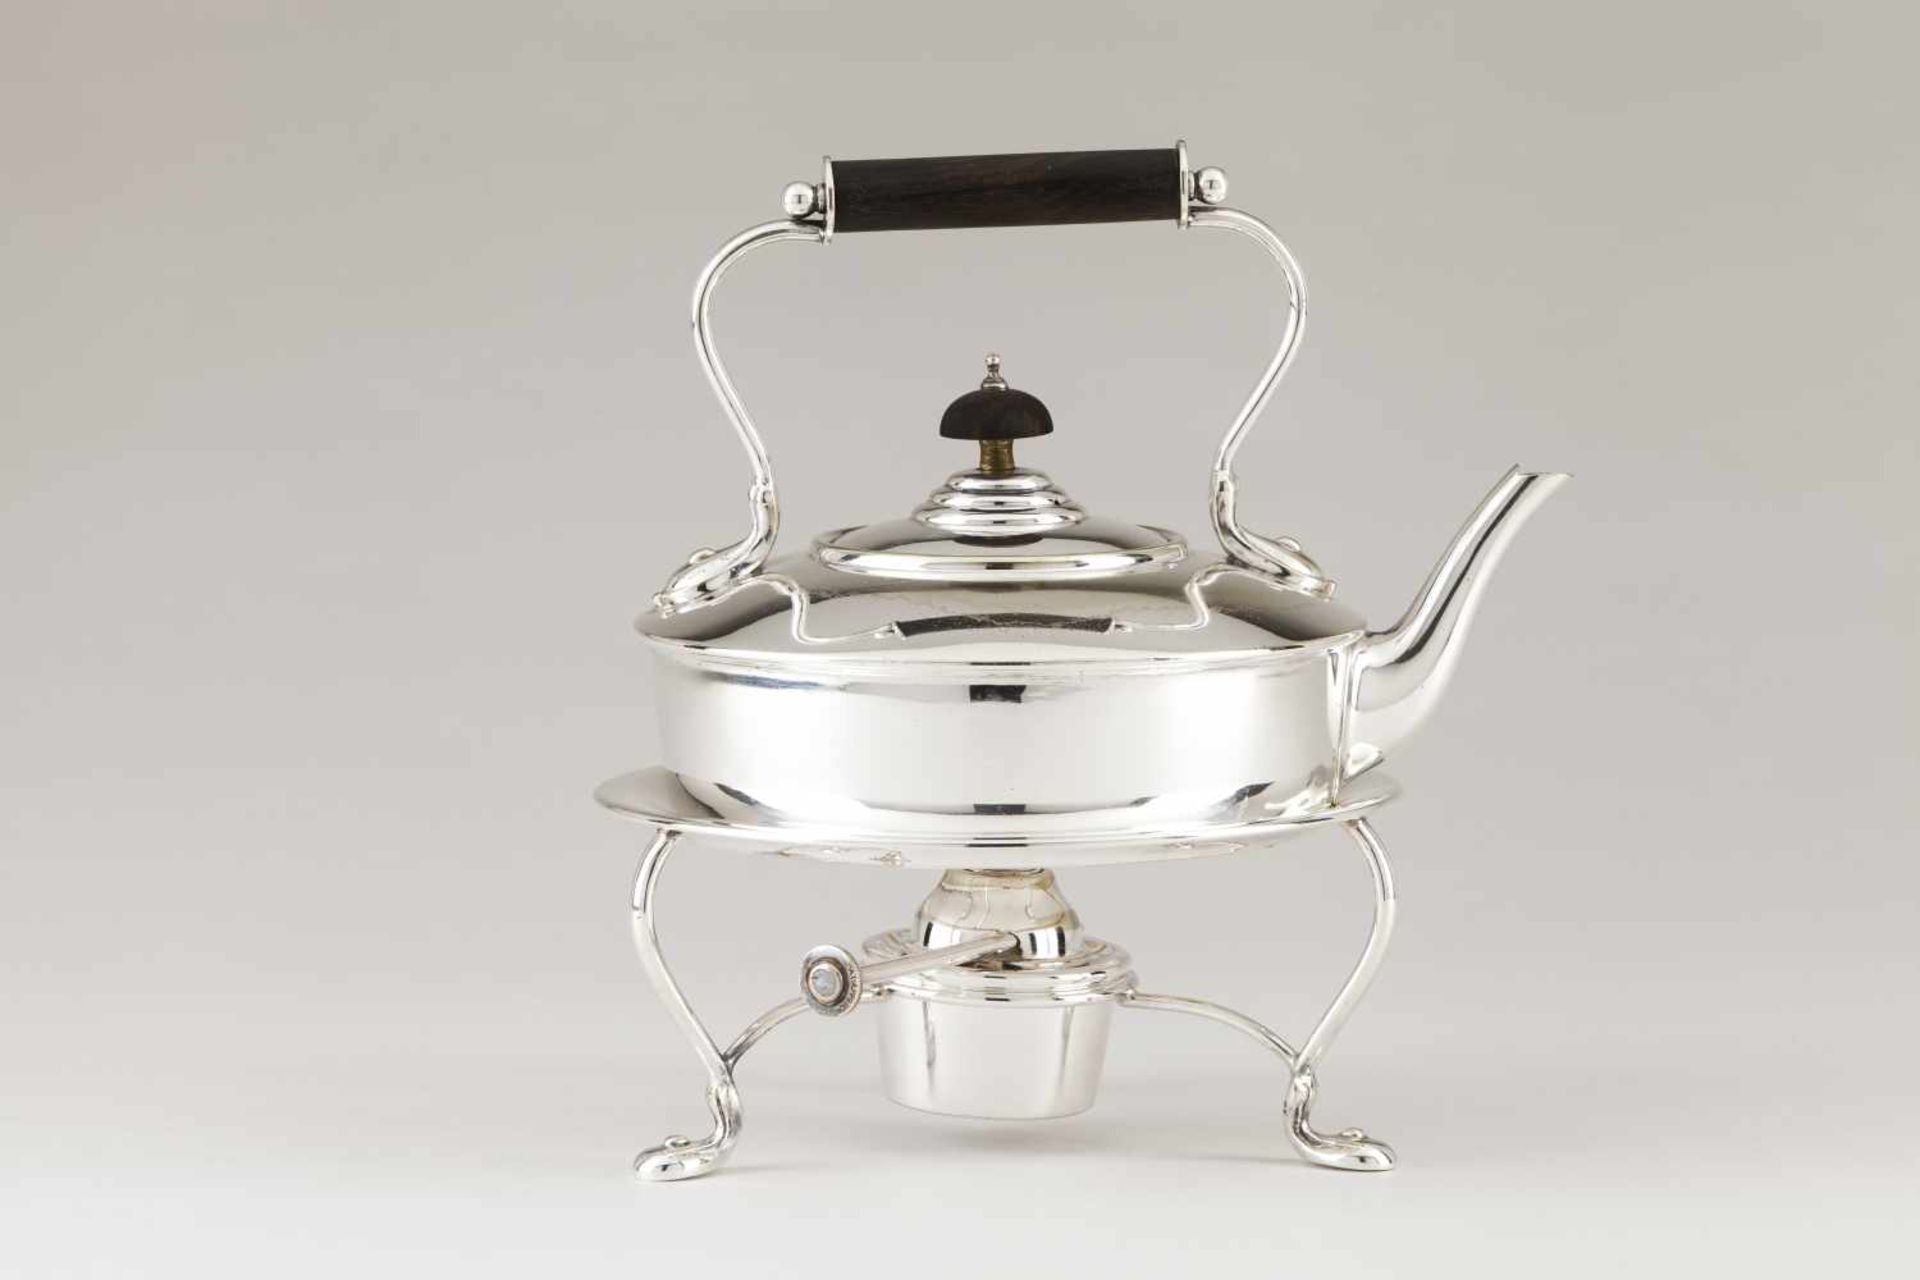 A kettle on stand with burnerSilvered metalPlain body of straight lines with wooden handle